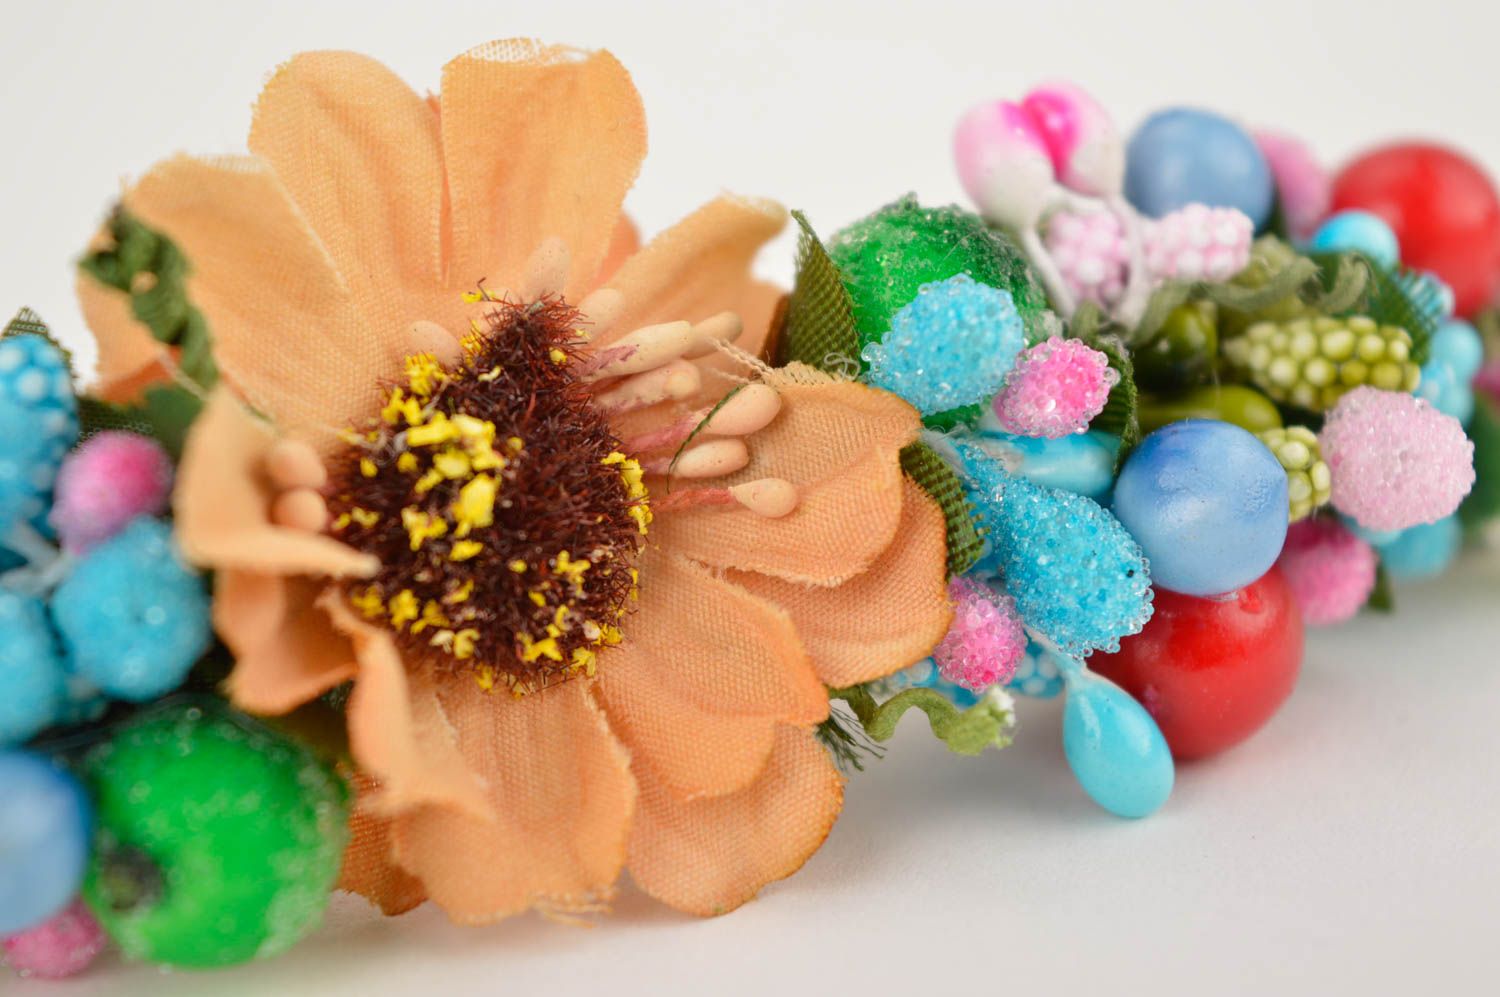 Beautiful handmade hair clip plastic barrette flowers in hair small gifts photo 2